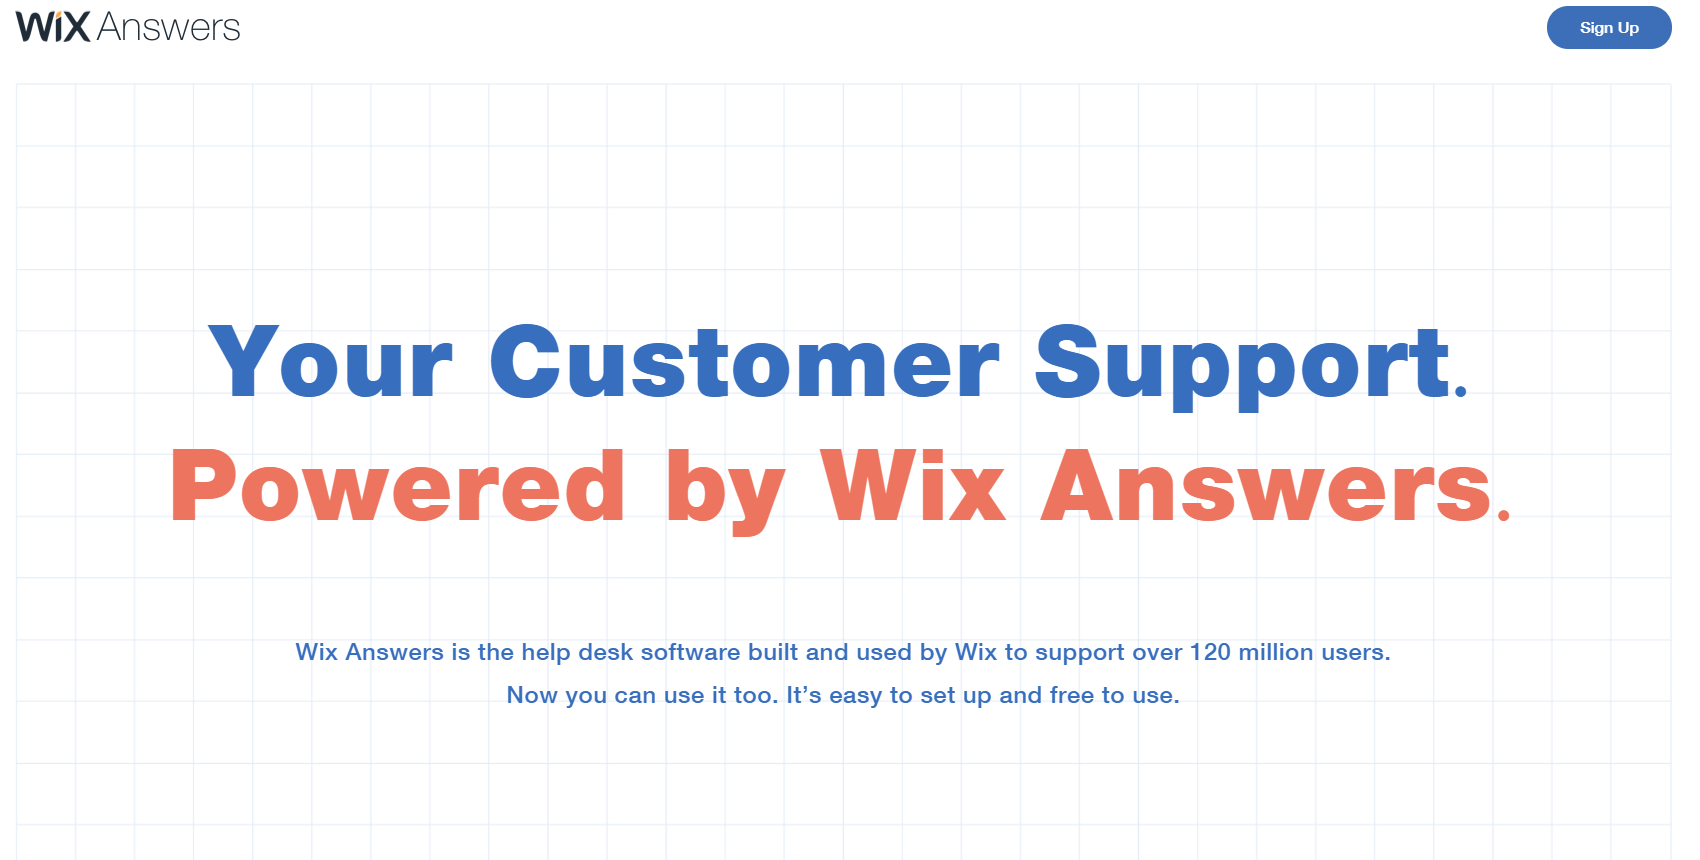 What Is Wix Answers And What Do You Need To Know About It